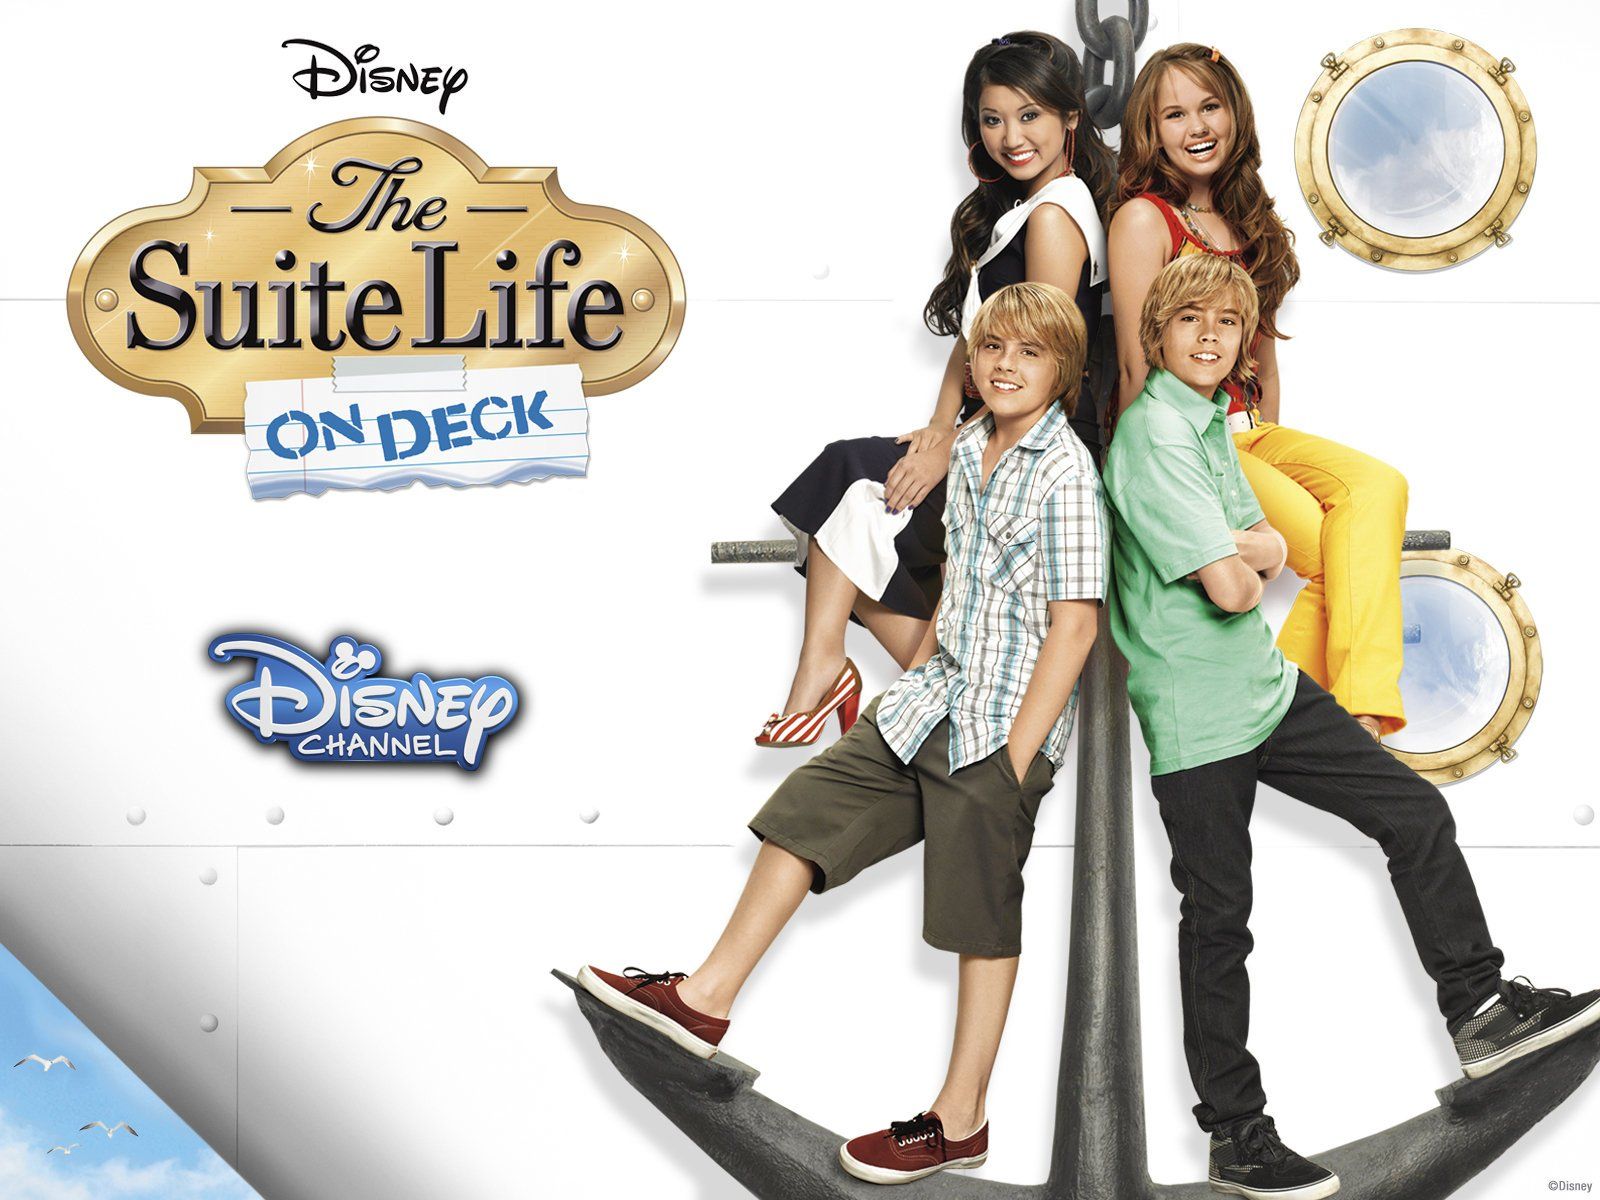 Watch The Suite Life On Deck Volume 1.